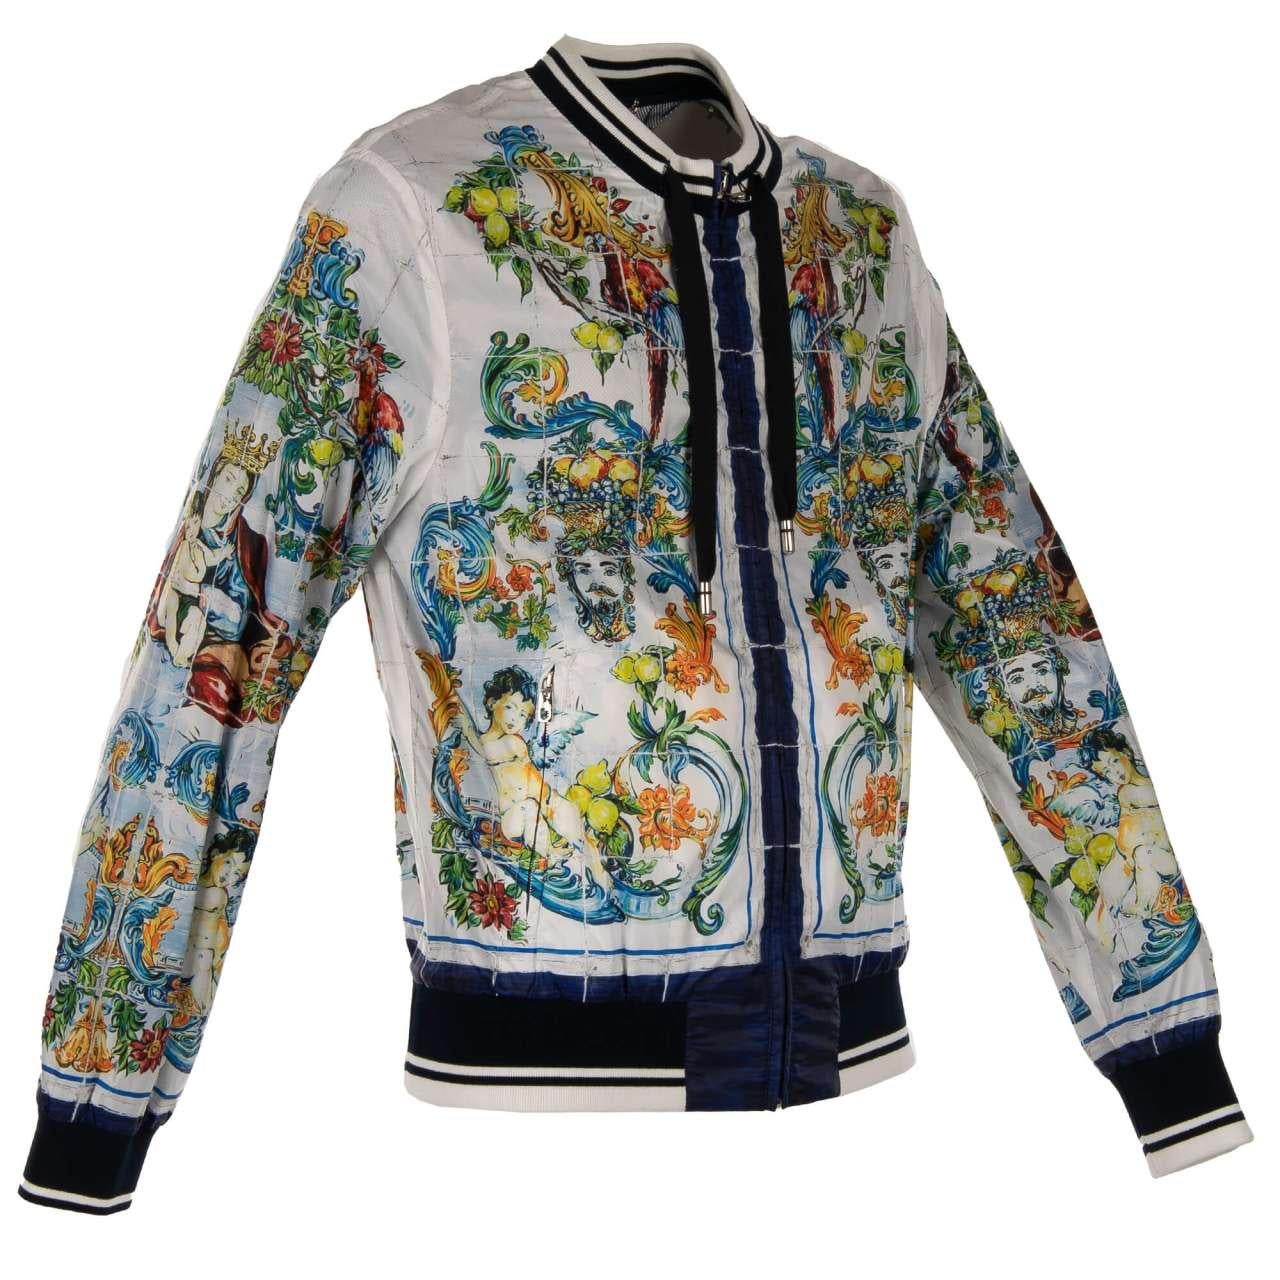 Dolce & Gabbana - Majolica Baroque Printed Bomber Jacket Blue White 52 In Excellent Condition For Sale In Erkrath, DE